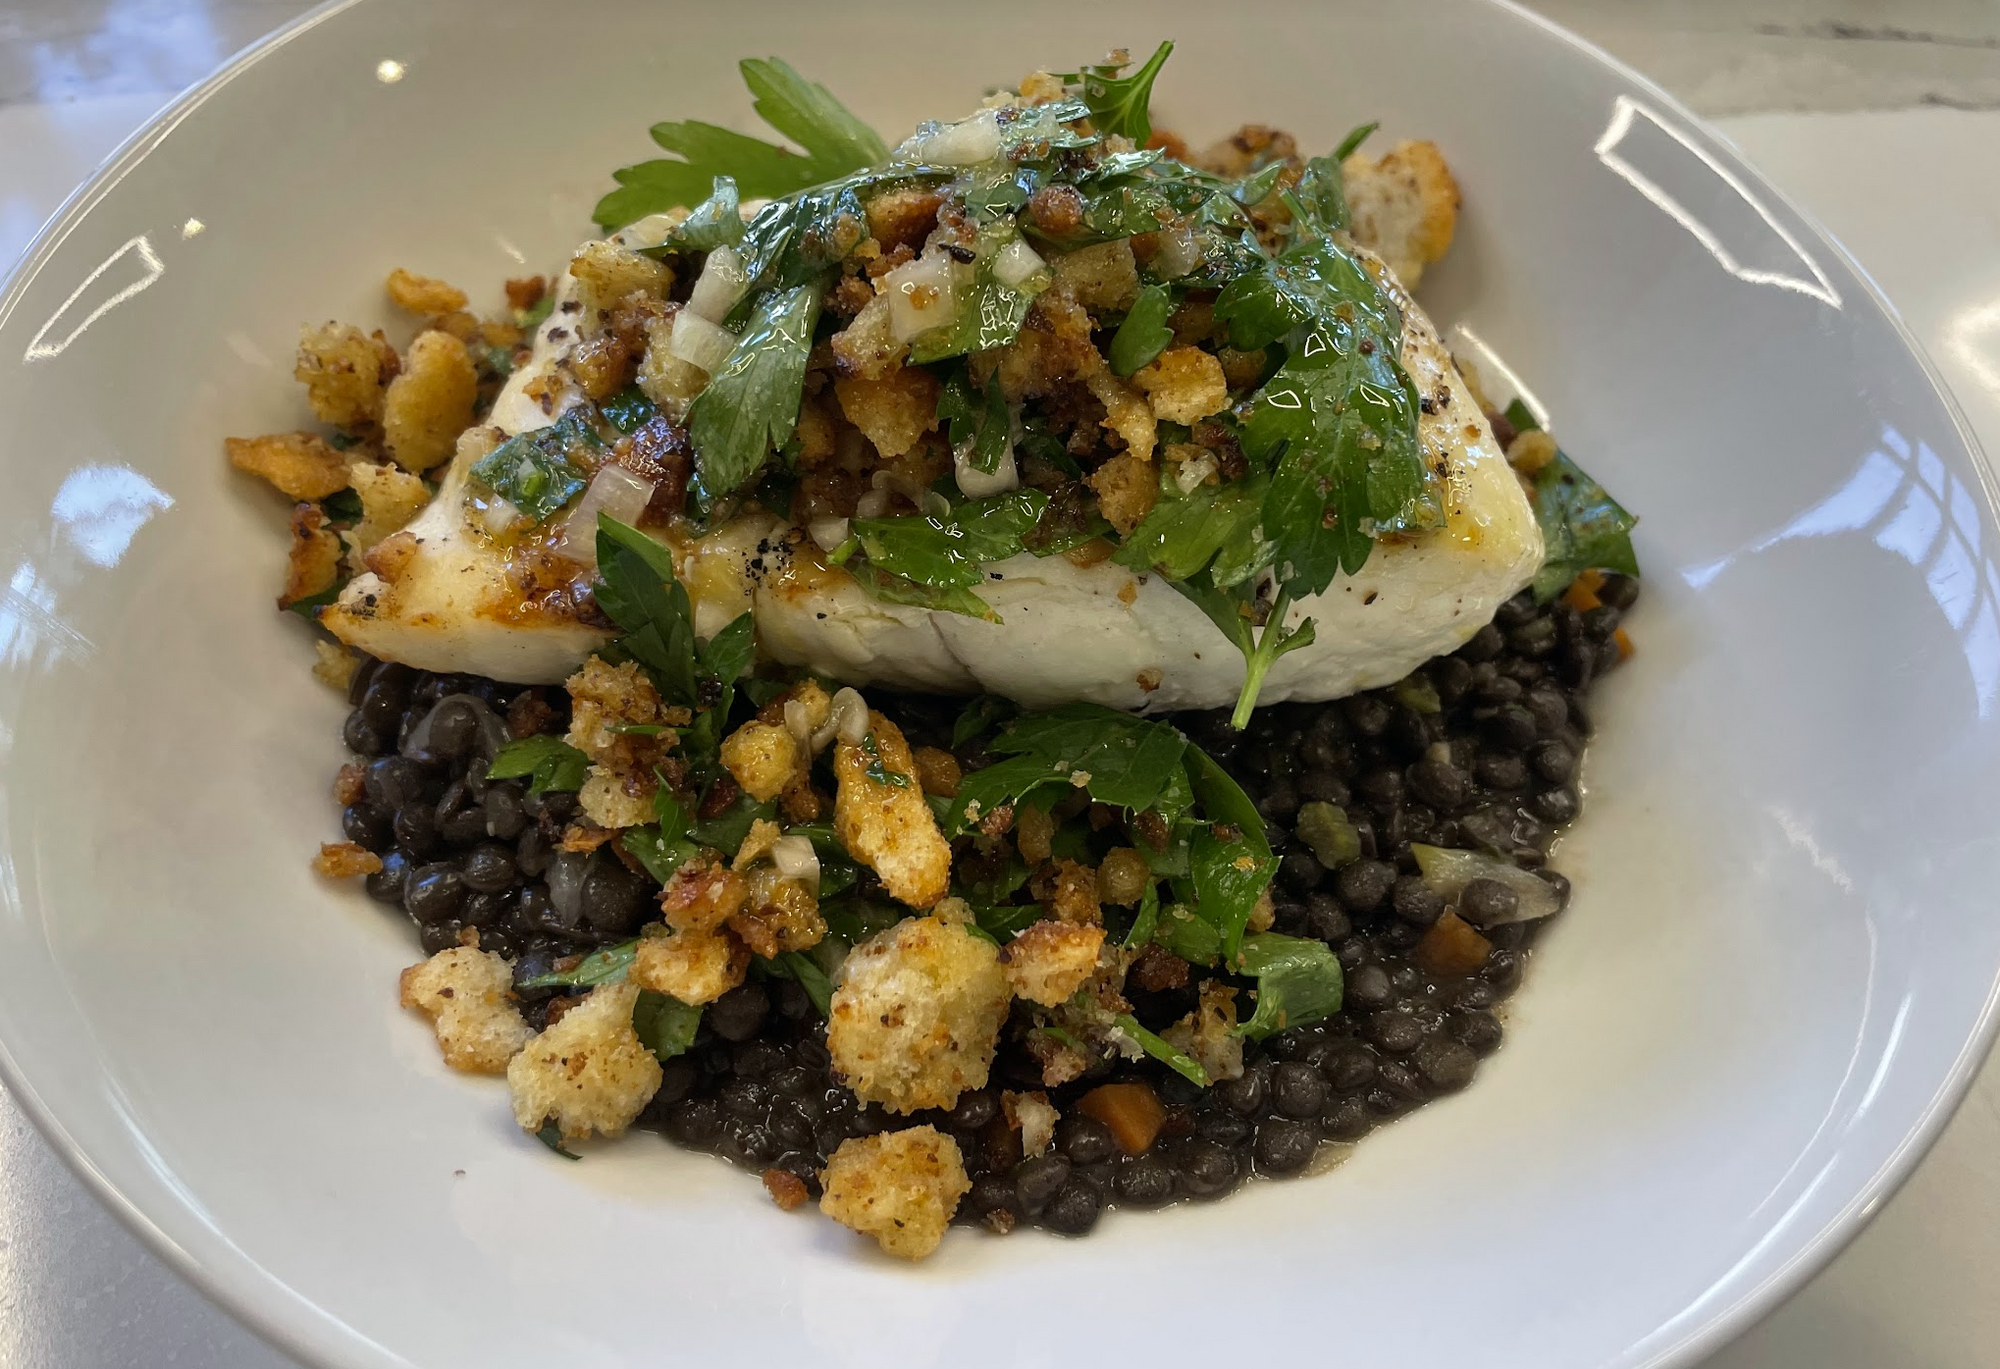 Pan-Roasted Halibut with Toasted Breadcrumb Salad and Green Lentils